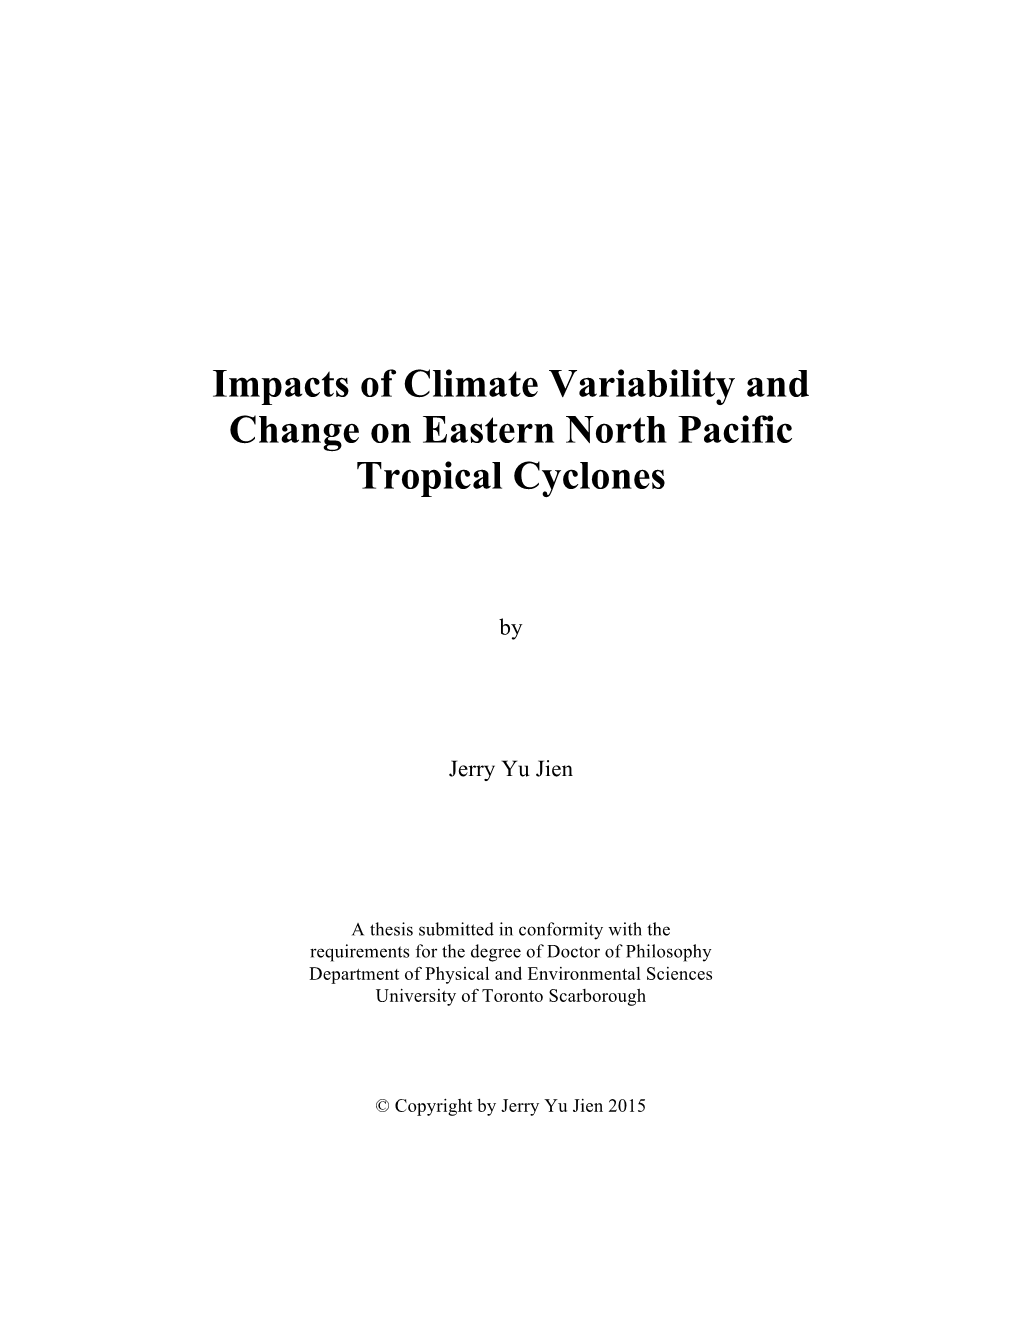 Impacts of Climate Variability and Change on Eastern North Pacific Tropical Cyclones